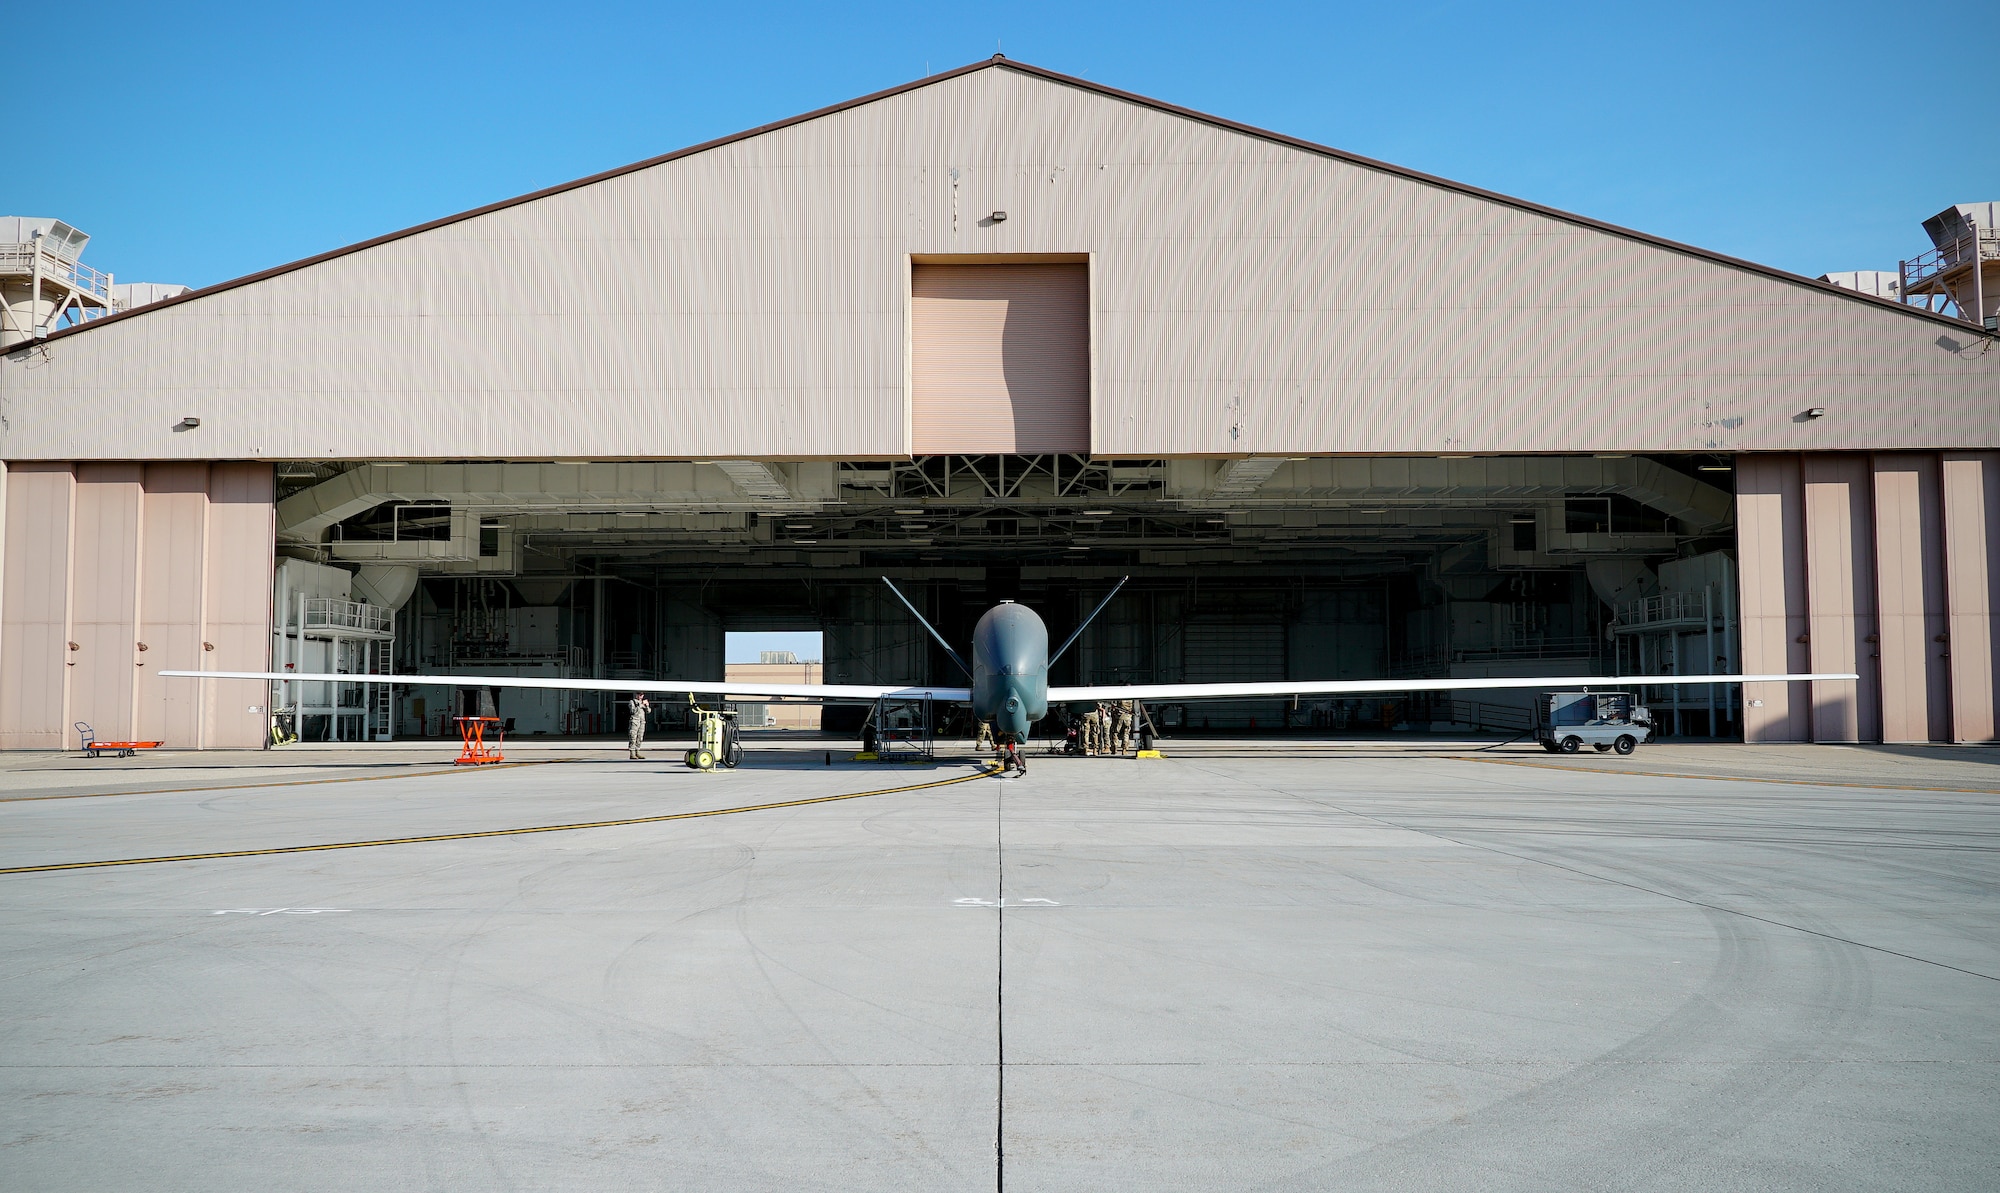 A small unmanned aircraft is shown in center frame in front o f an open hangar, with its wingspan shown in entirety from left to right of the picture.